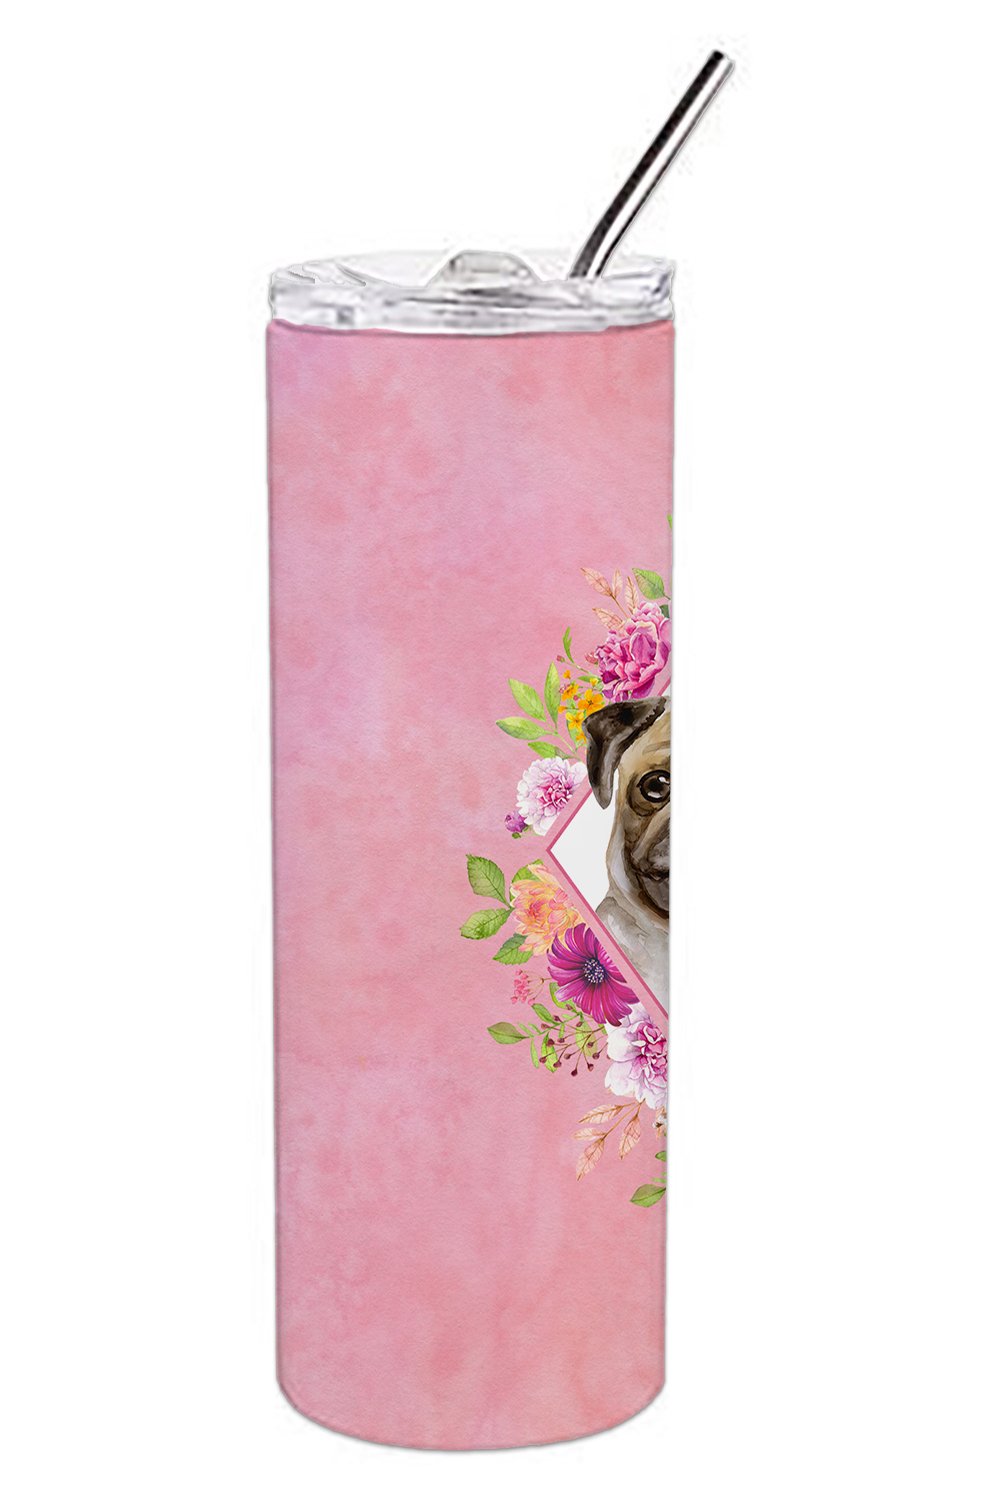 Fawn Pug Pink Flowers Double Walled Stainless Steel 20 oz Skinny Tumbler CK4174TBL20 by Caroline's Treasures